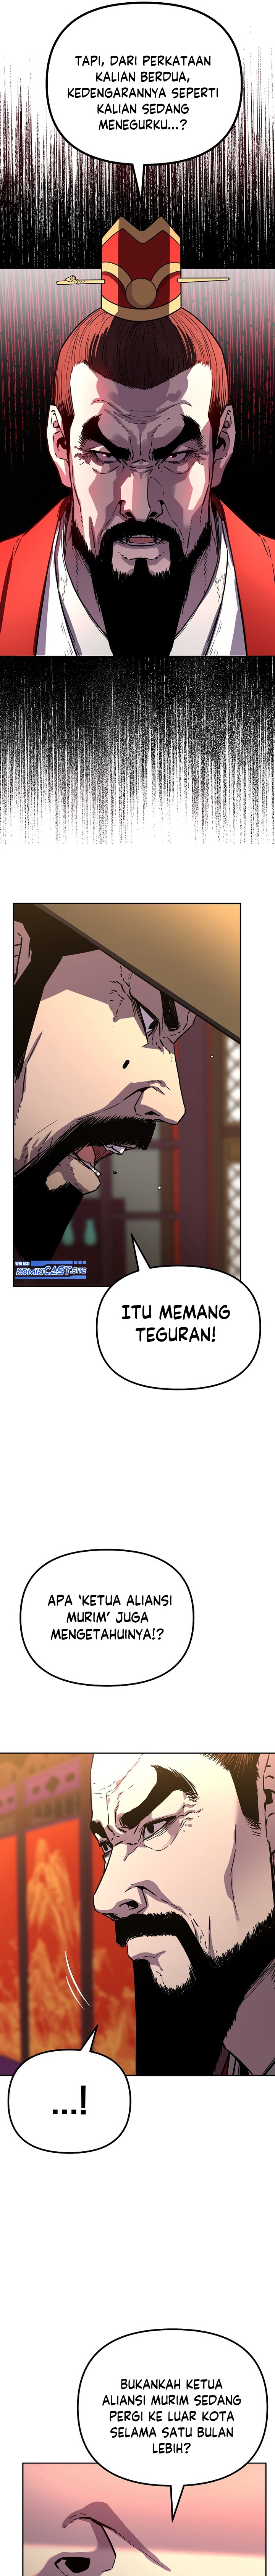 Reincarnation Of The Murim Clan’s Former Ranker Chapter 86